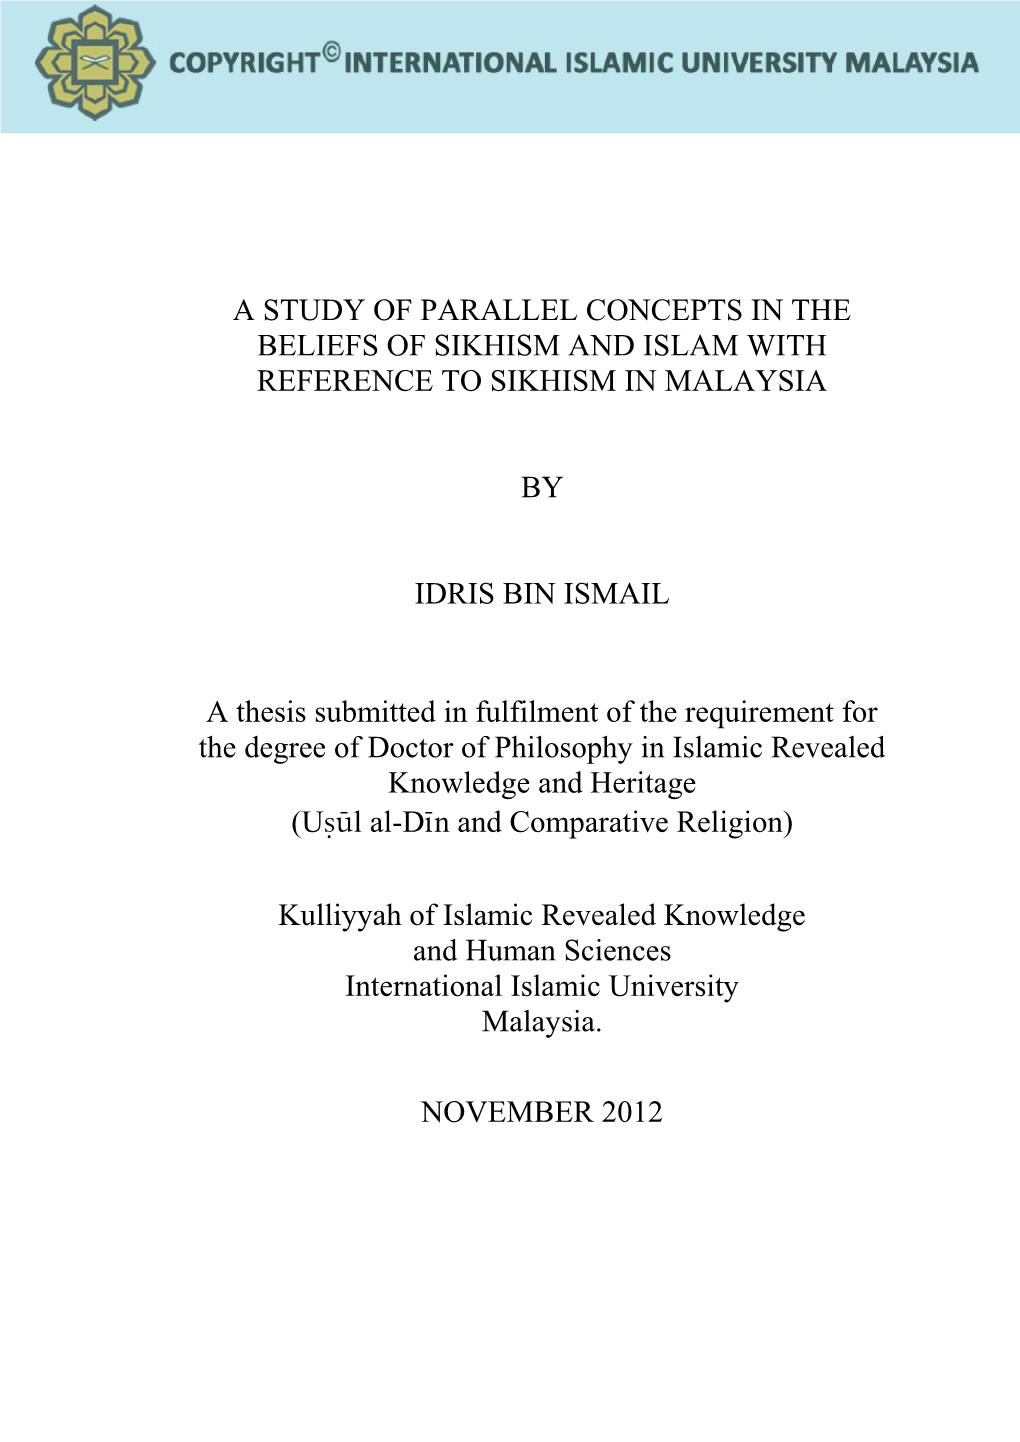 A Study of Parallel Concepts in the Beliefs of Sikhism and Islam with Reference to Sikhism in Malaysia